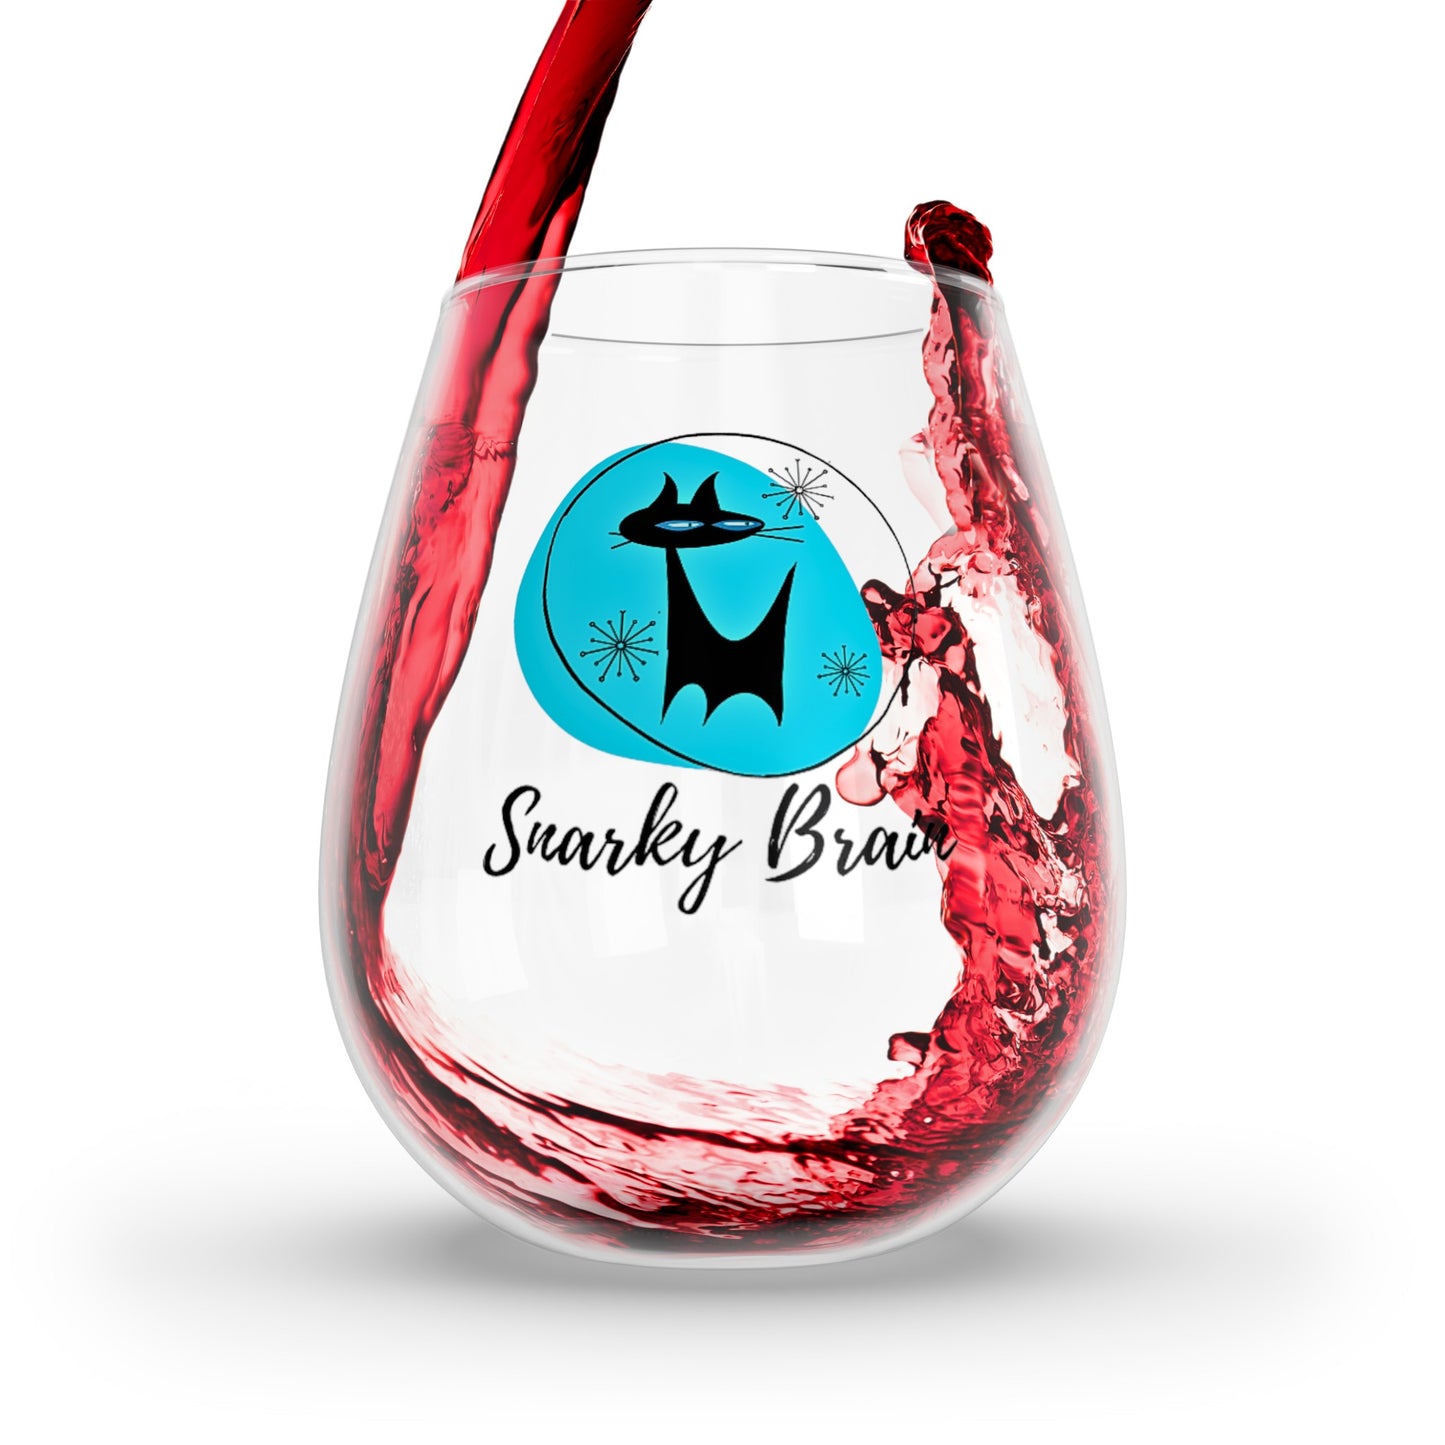 Snarky Brain Midcentury Modern Atomic Cat Turquoise Cocktail Party Stemless Wine Glass, 11.75oz